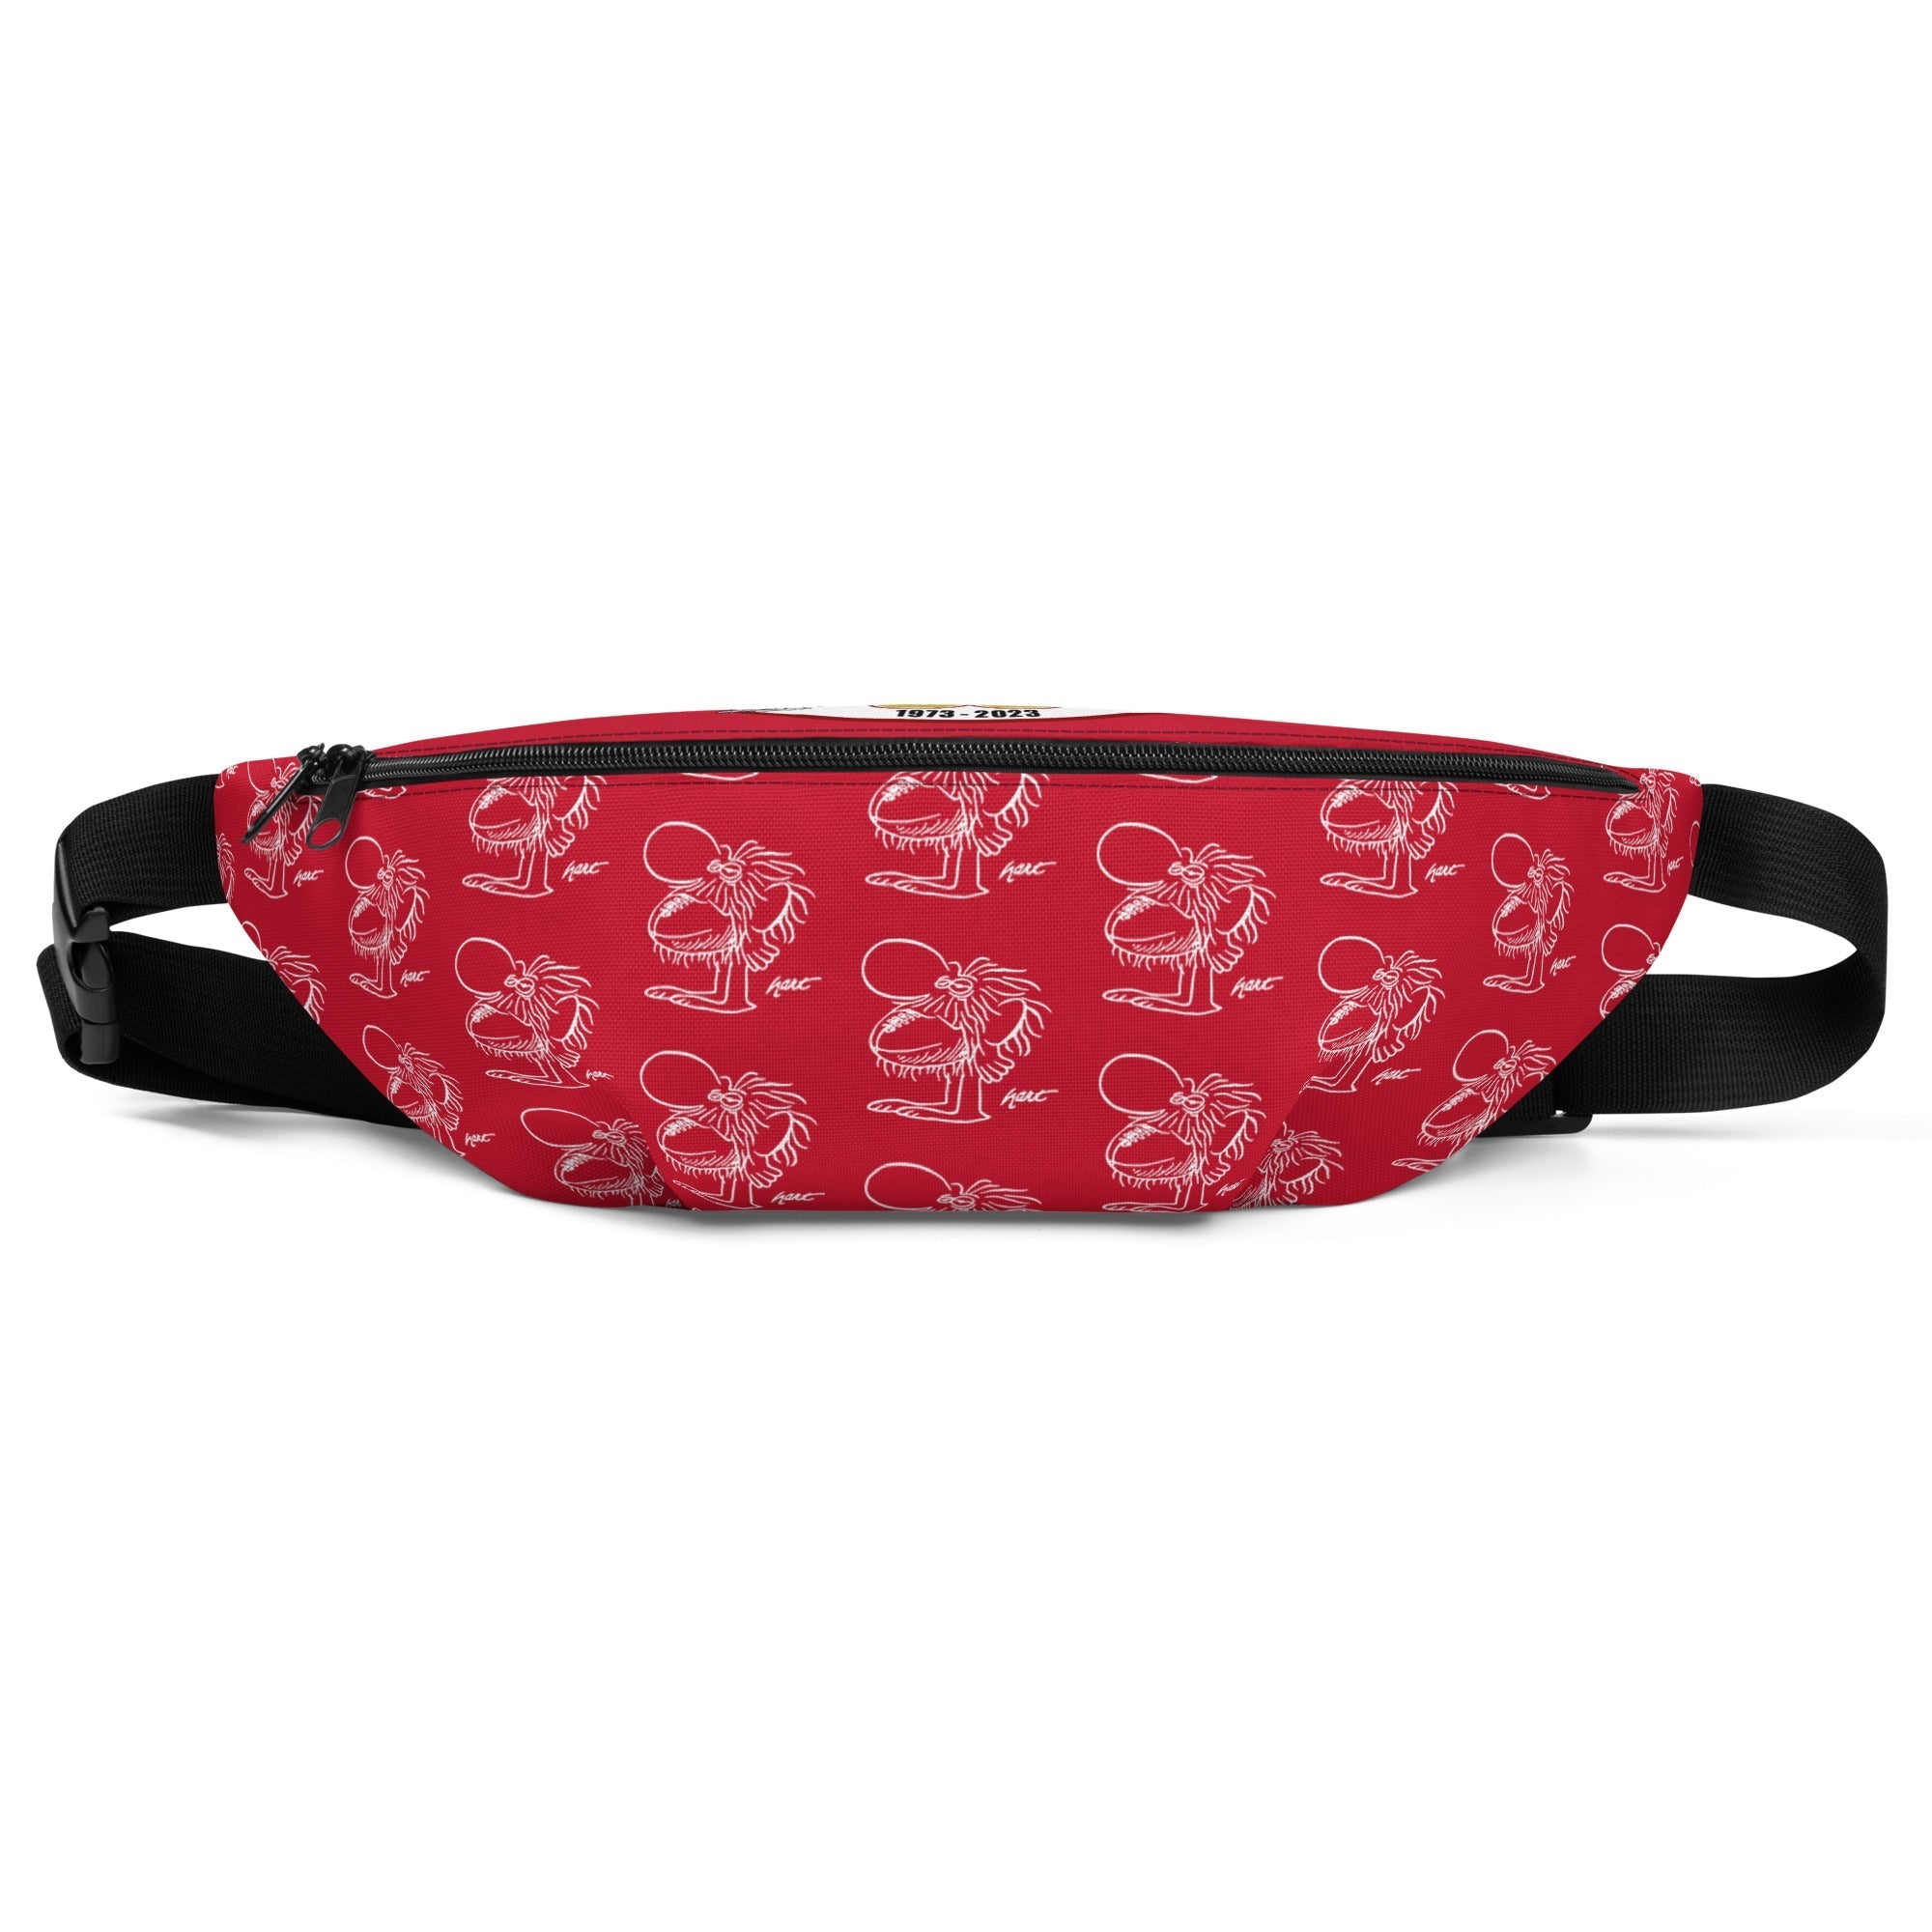 Rugby Imports Binghamton Barbarians Rugby Fanny Pack